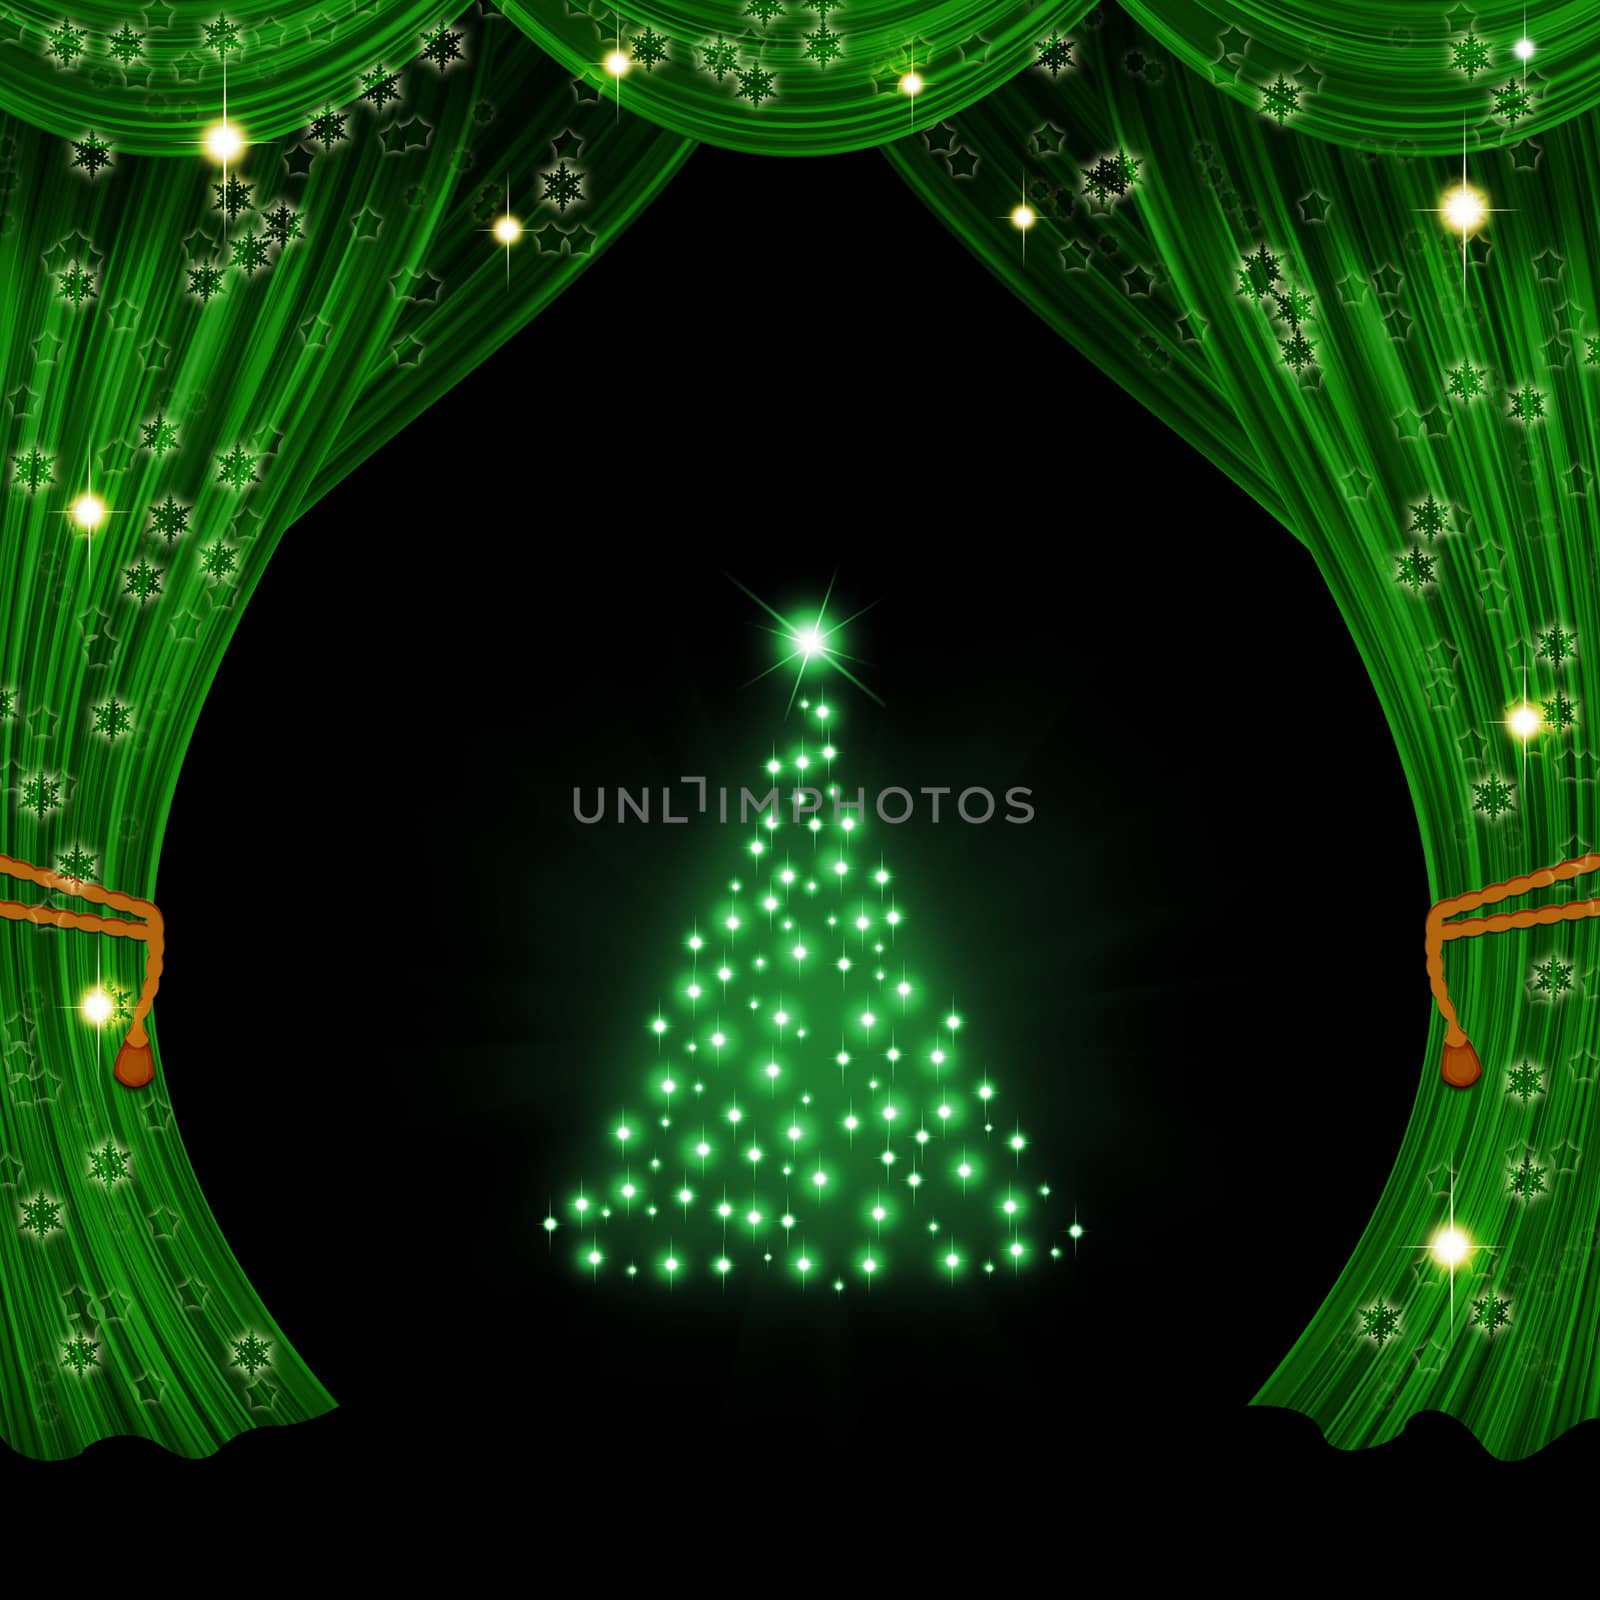 Christmas open curtain. Green fabric, stars, snowflakes and tree